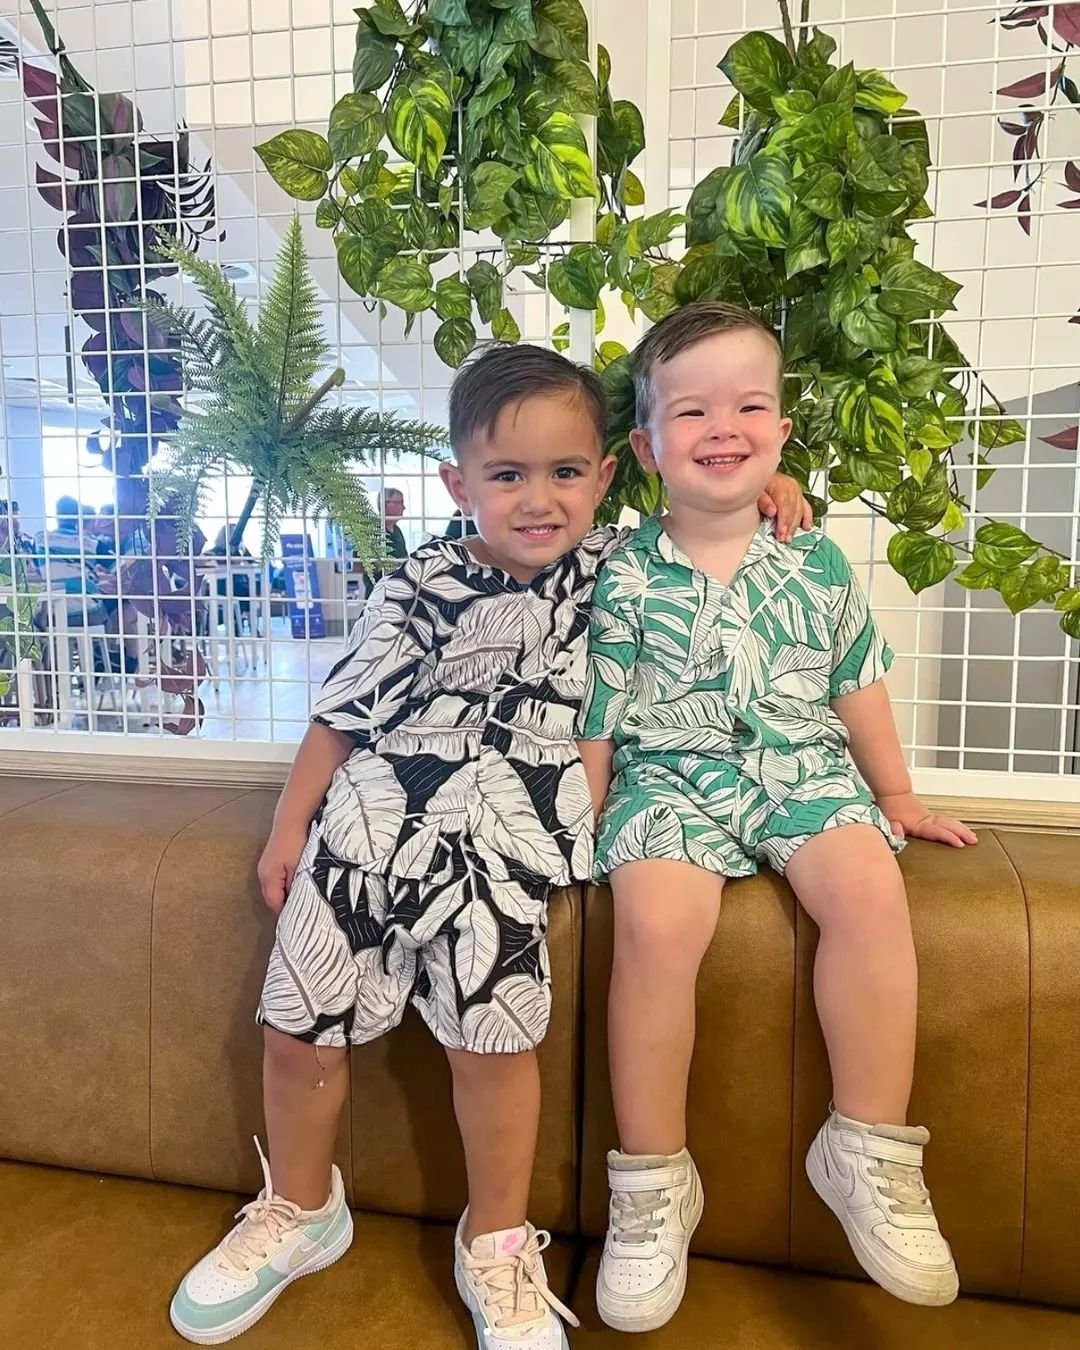 Little legends like these two love to spoil their Mums, so help them out and book a table to celebrate this Sunday. 👨&zwj;👩&zwj;👧&zwj;👦 💕

Treat Mum to&hellip;
🌷 Mother&rsquo;s Day Specials for both lunch &amp; dinner at The Bistro 👨🏻&zwj;🍳
